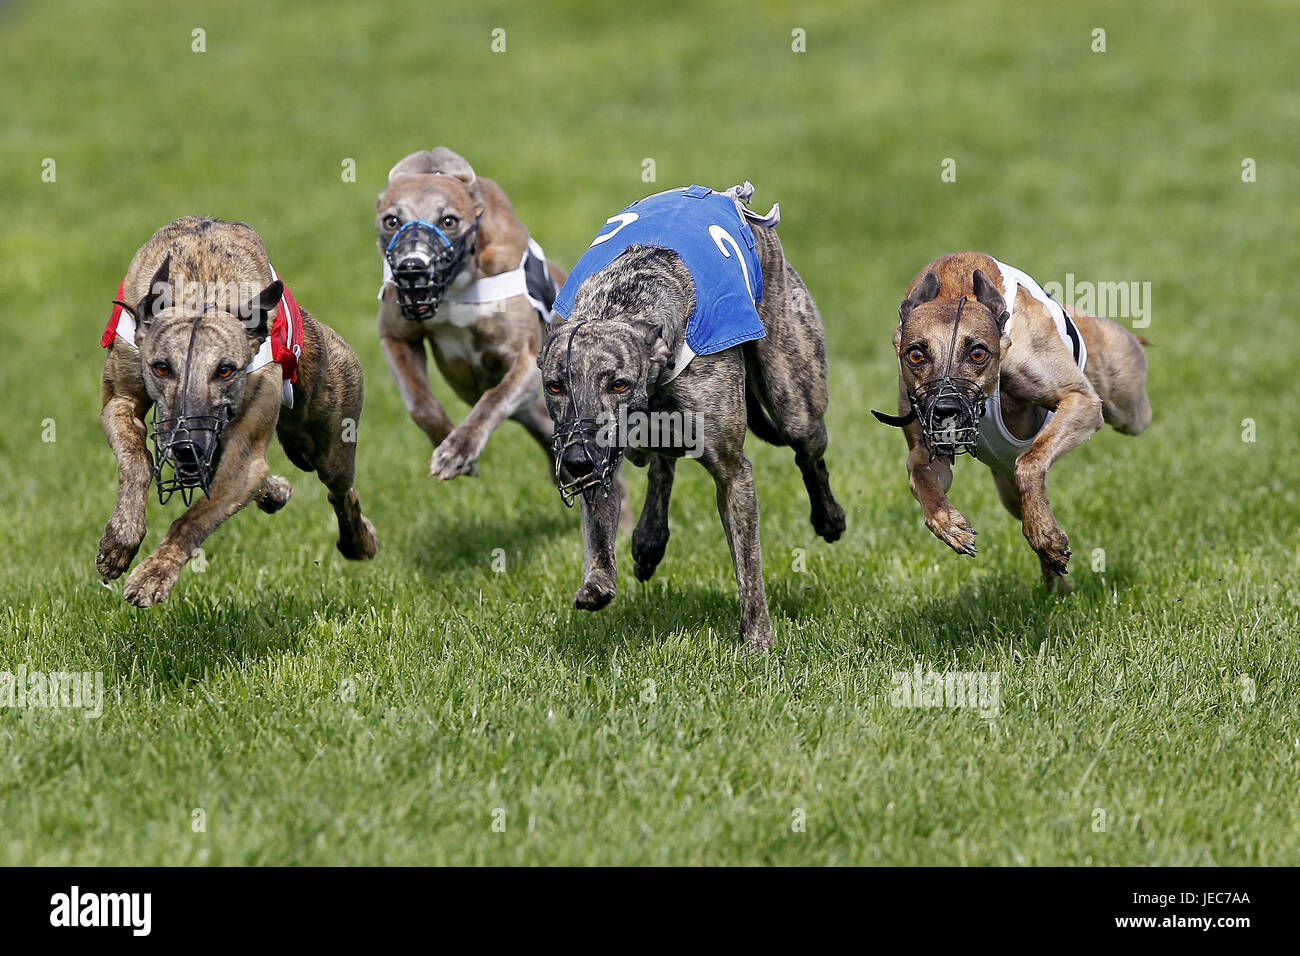 Whippet with dog race, Stock Photo